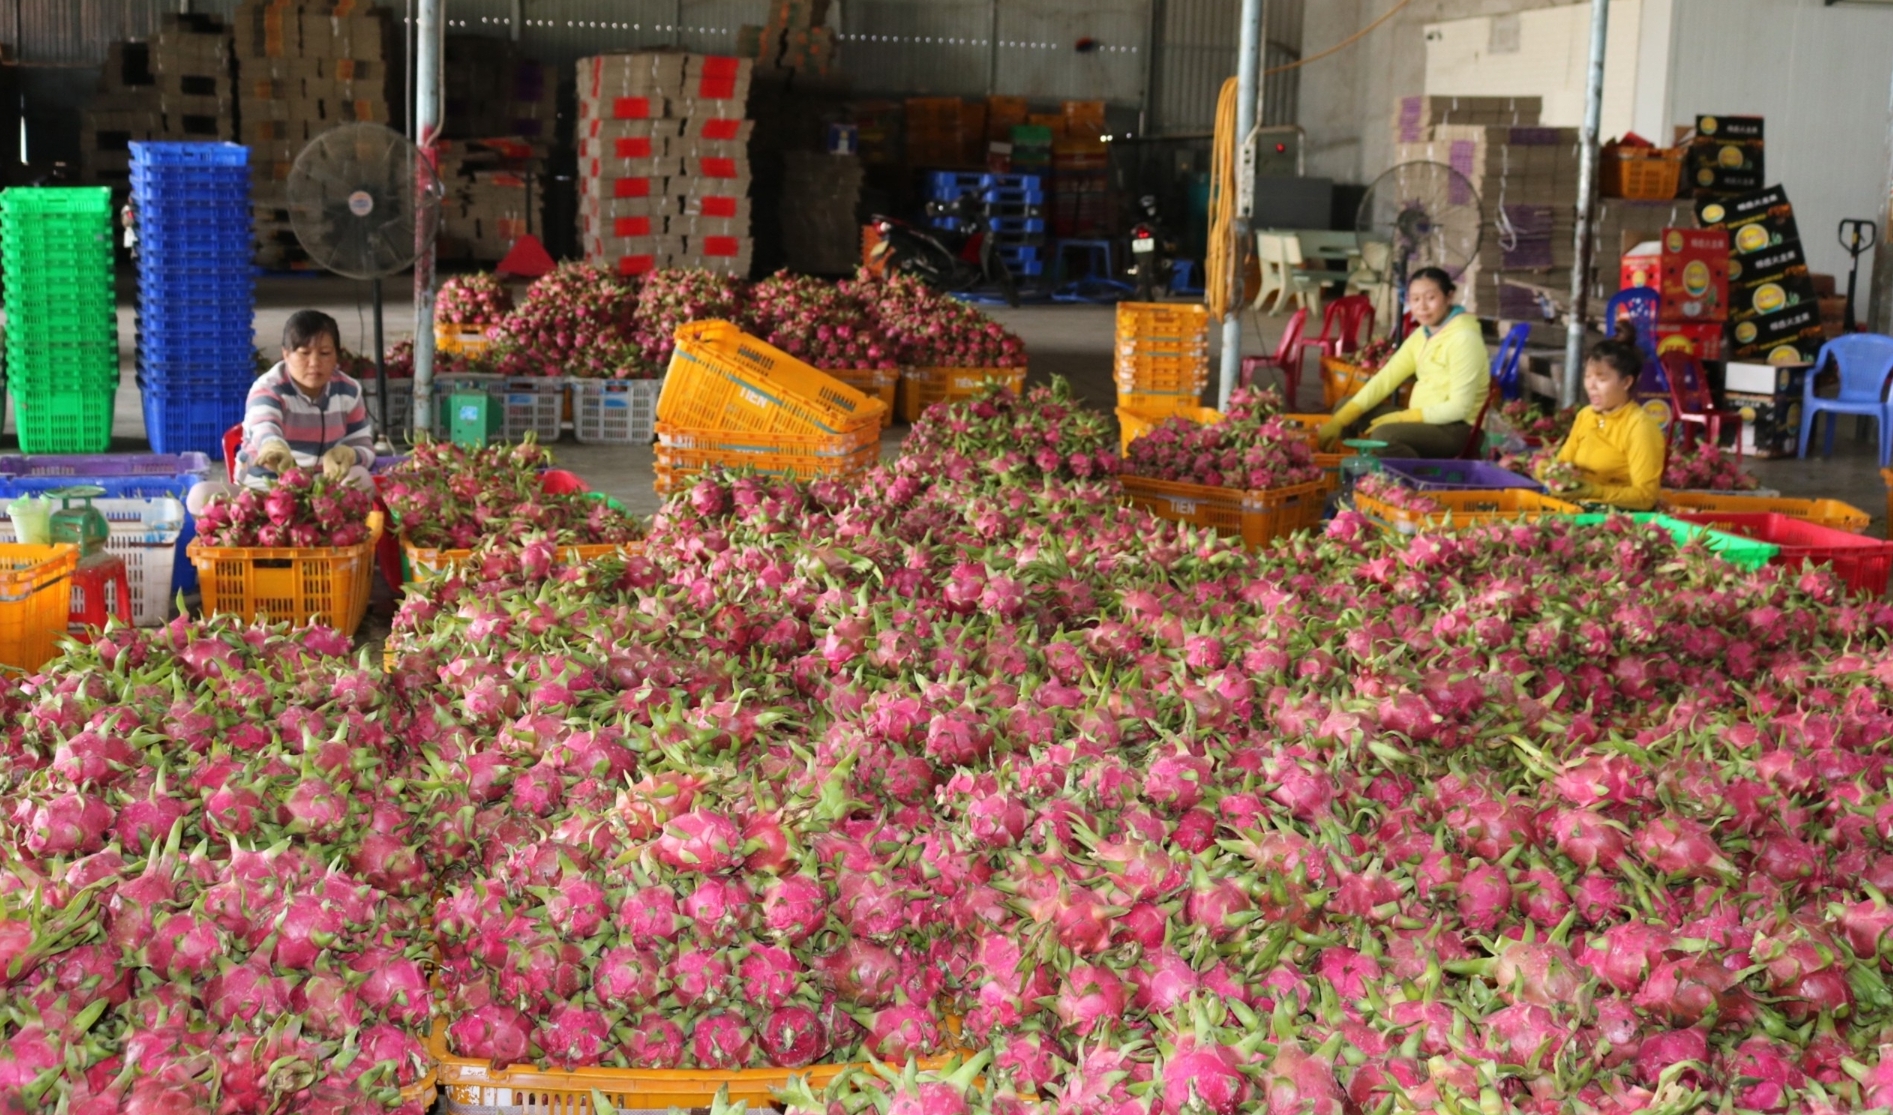 Binh Thuan is trying to promote the granting of Production Unit Codes and packing facility codes to serve dragon fruit exports to other countries. Photo: KS.